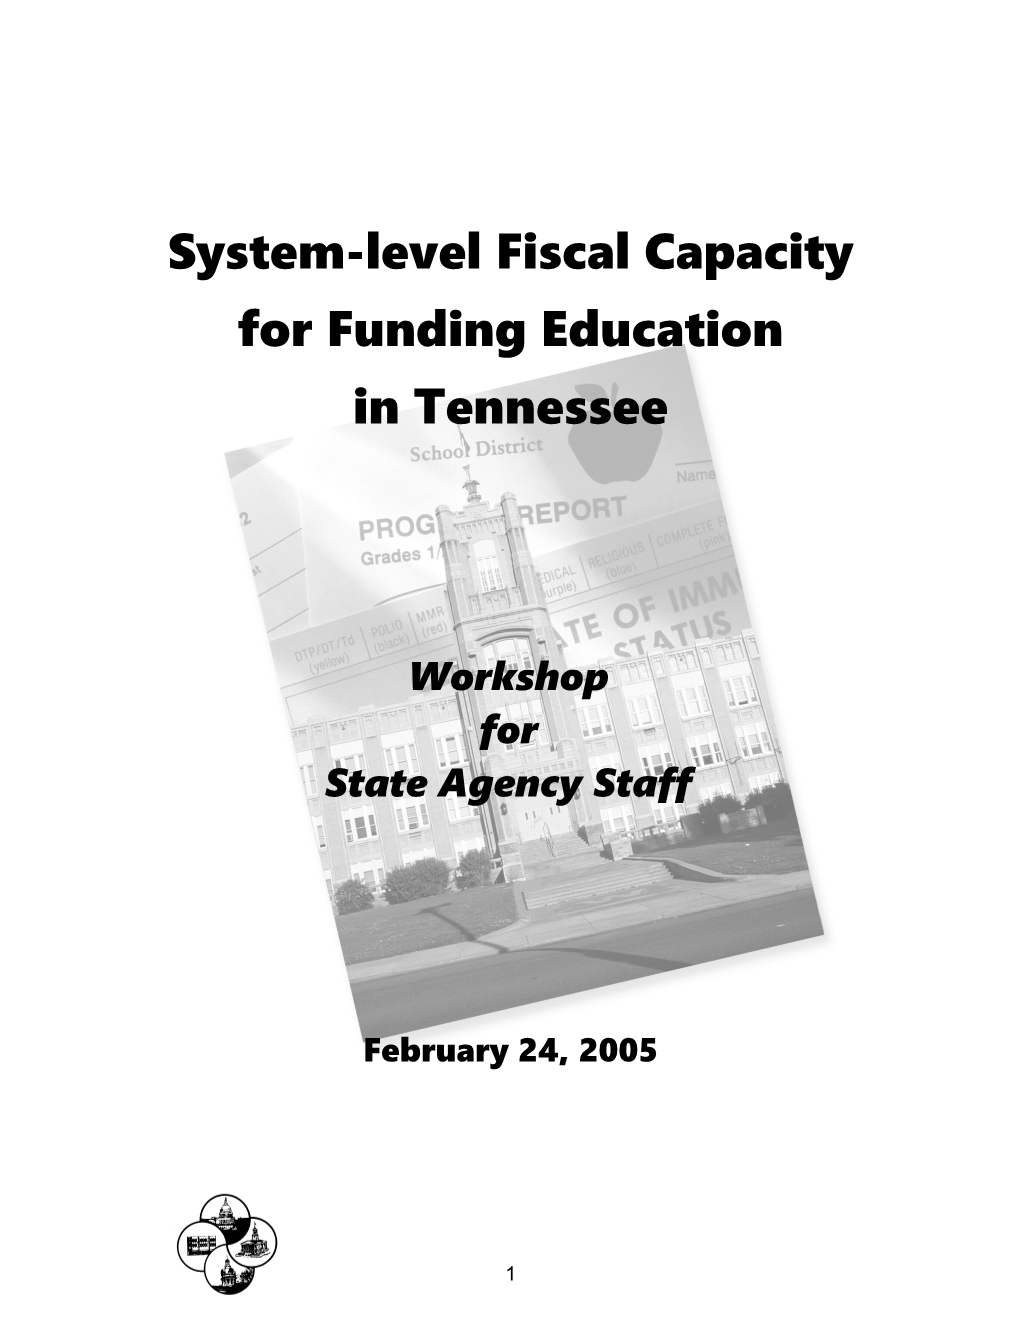 System-Level Fiscal Capacity for Funding Education in Tennessee